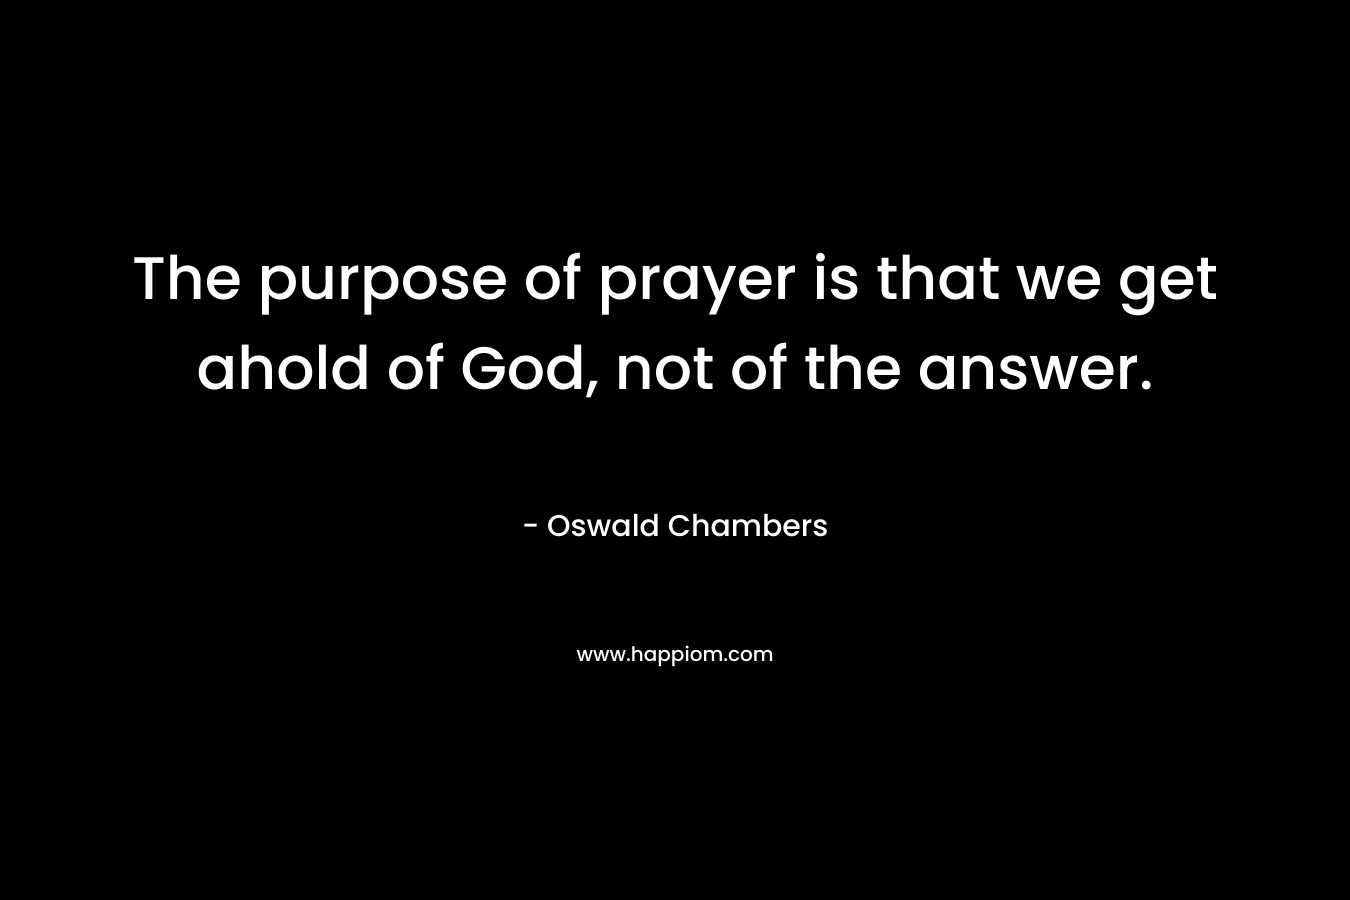 The purpose of prayer is that we get ahold of God, not of the answer.